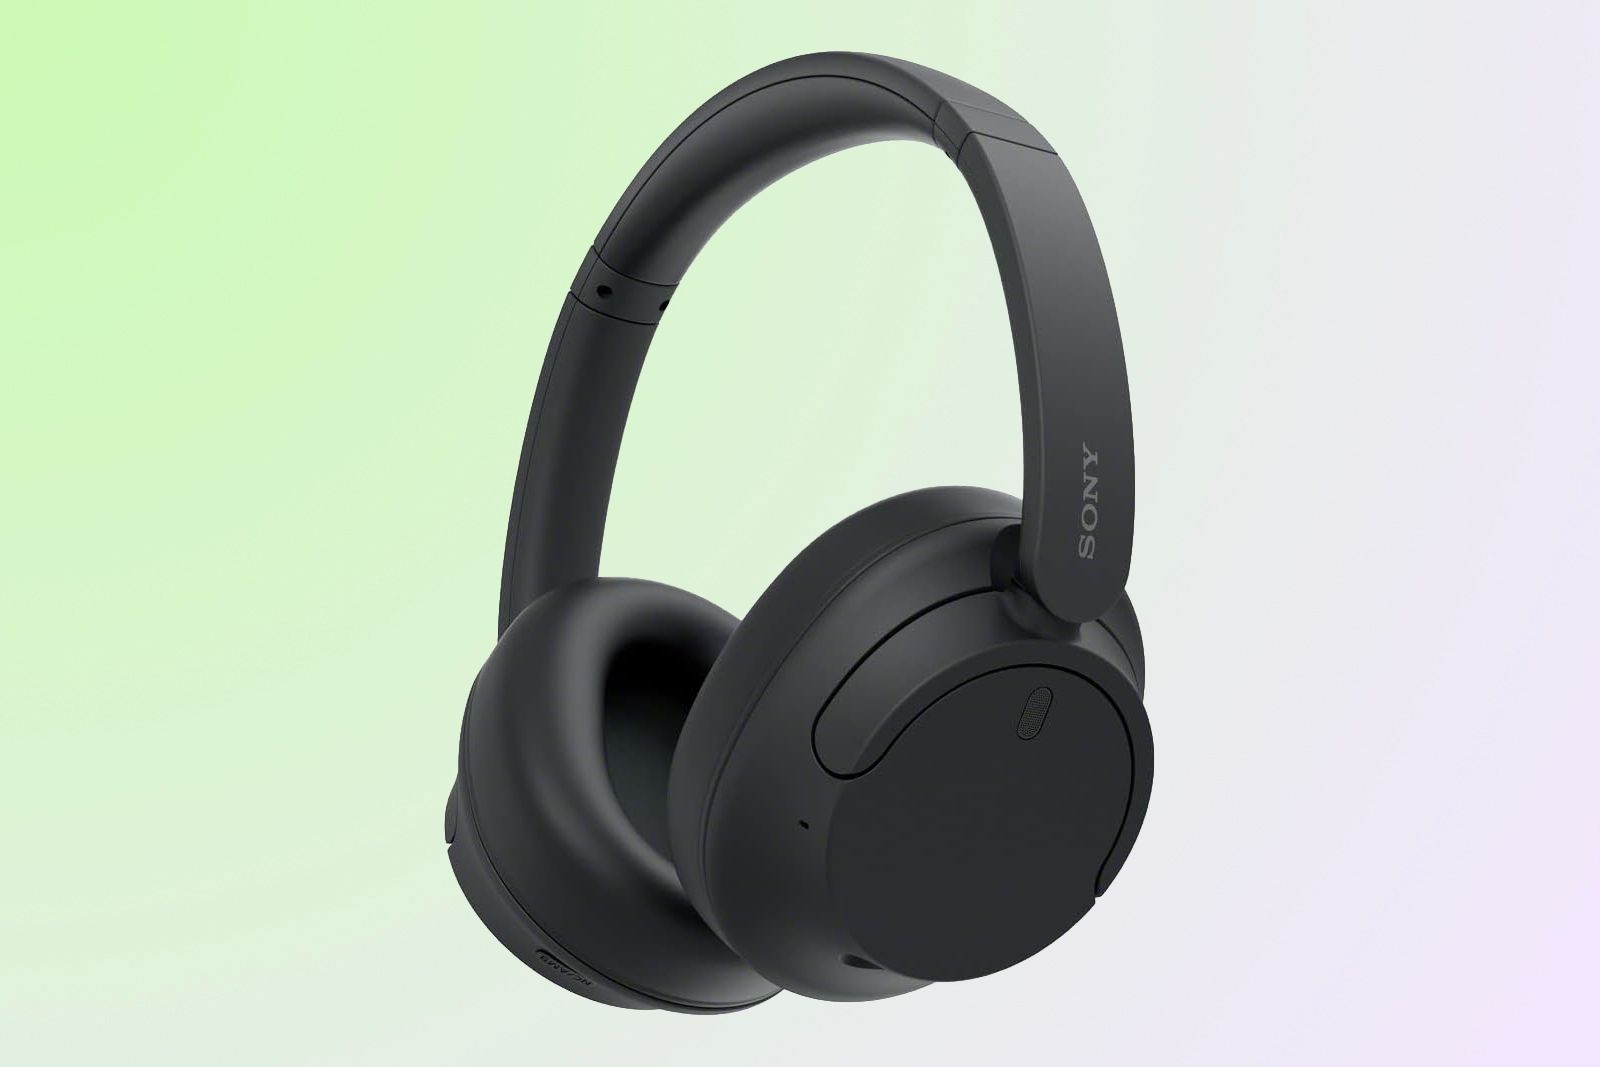 Black headphones with big ear cups on a greenish-blue background.